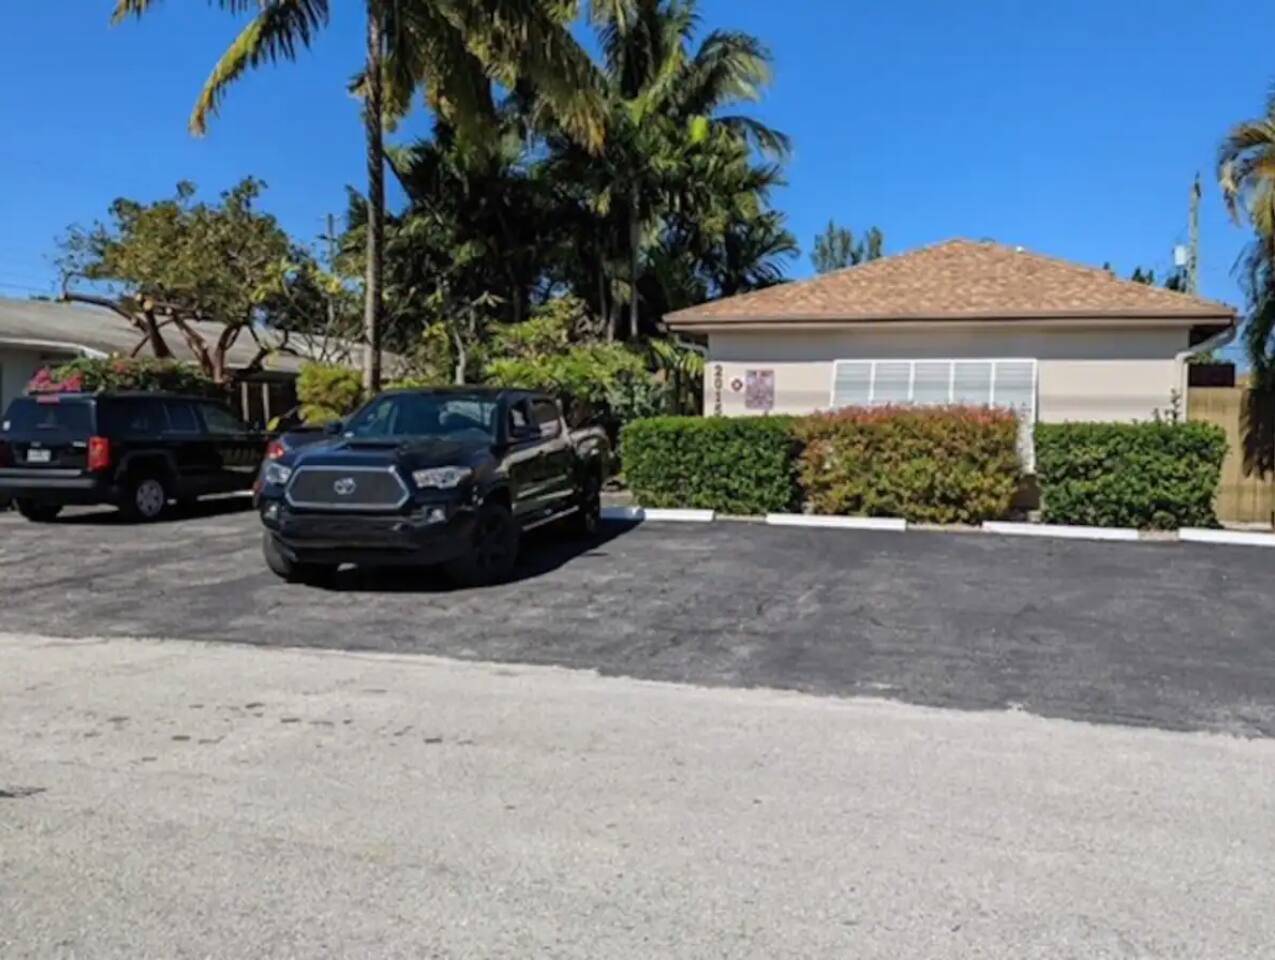 Fort Laudredale Vacation Rental